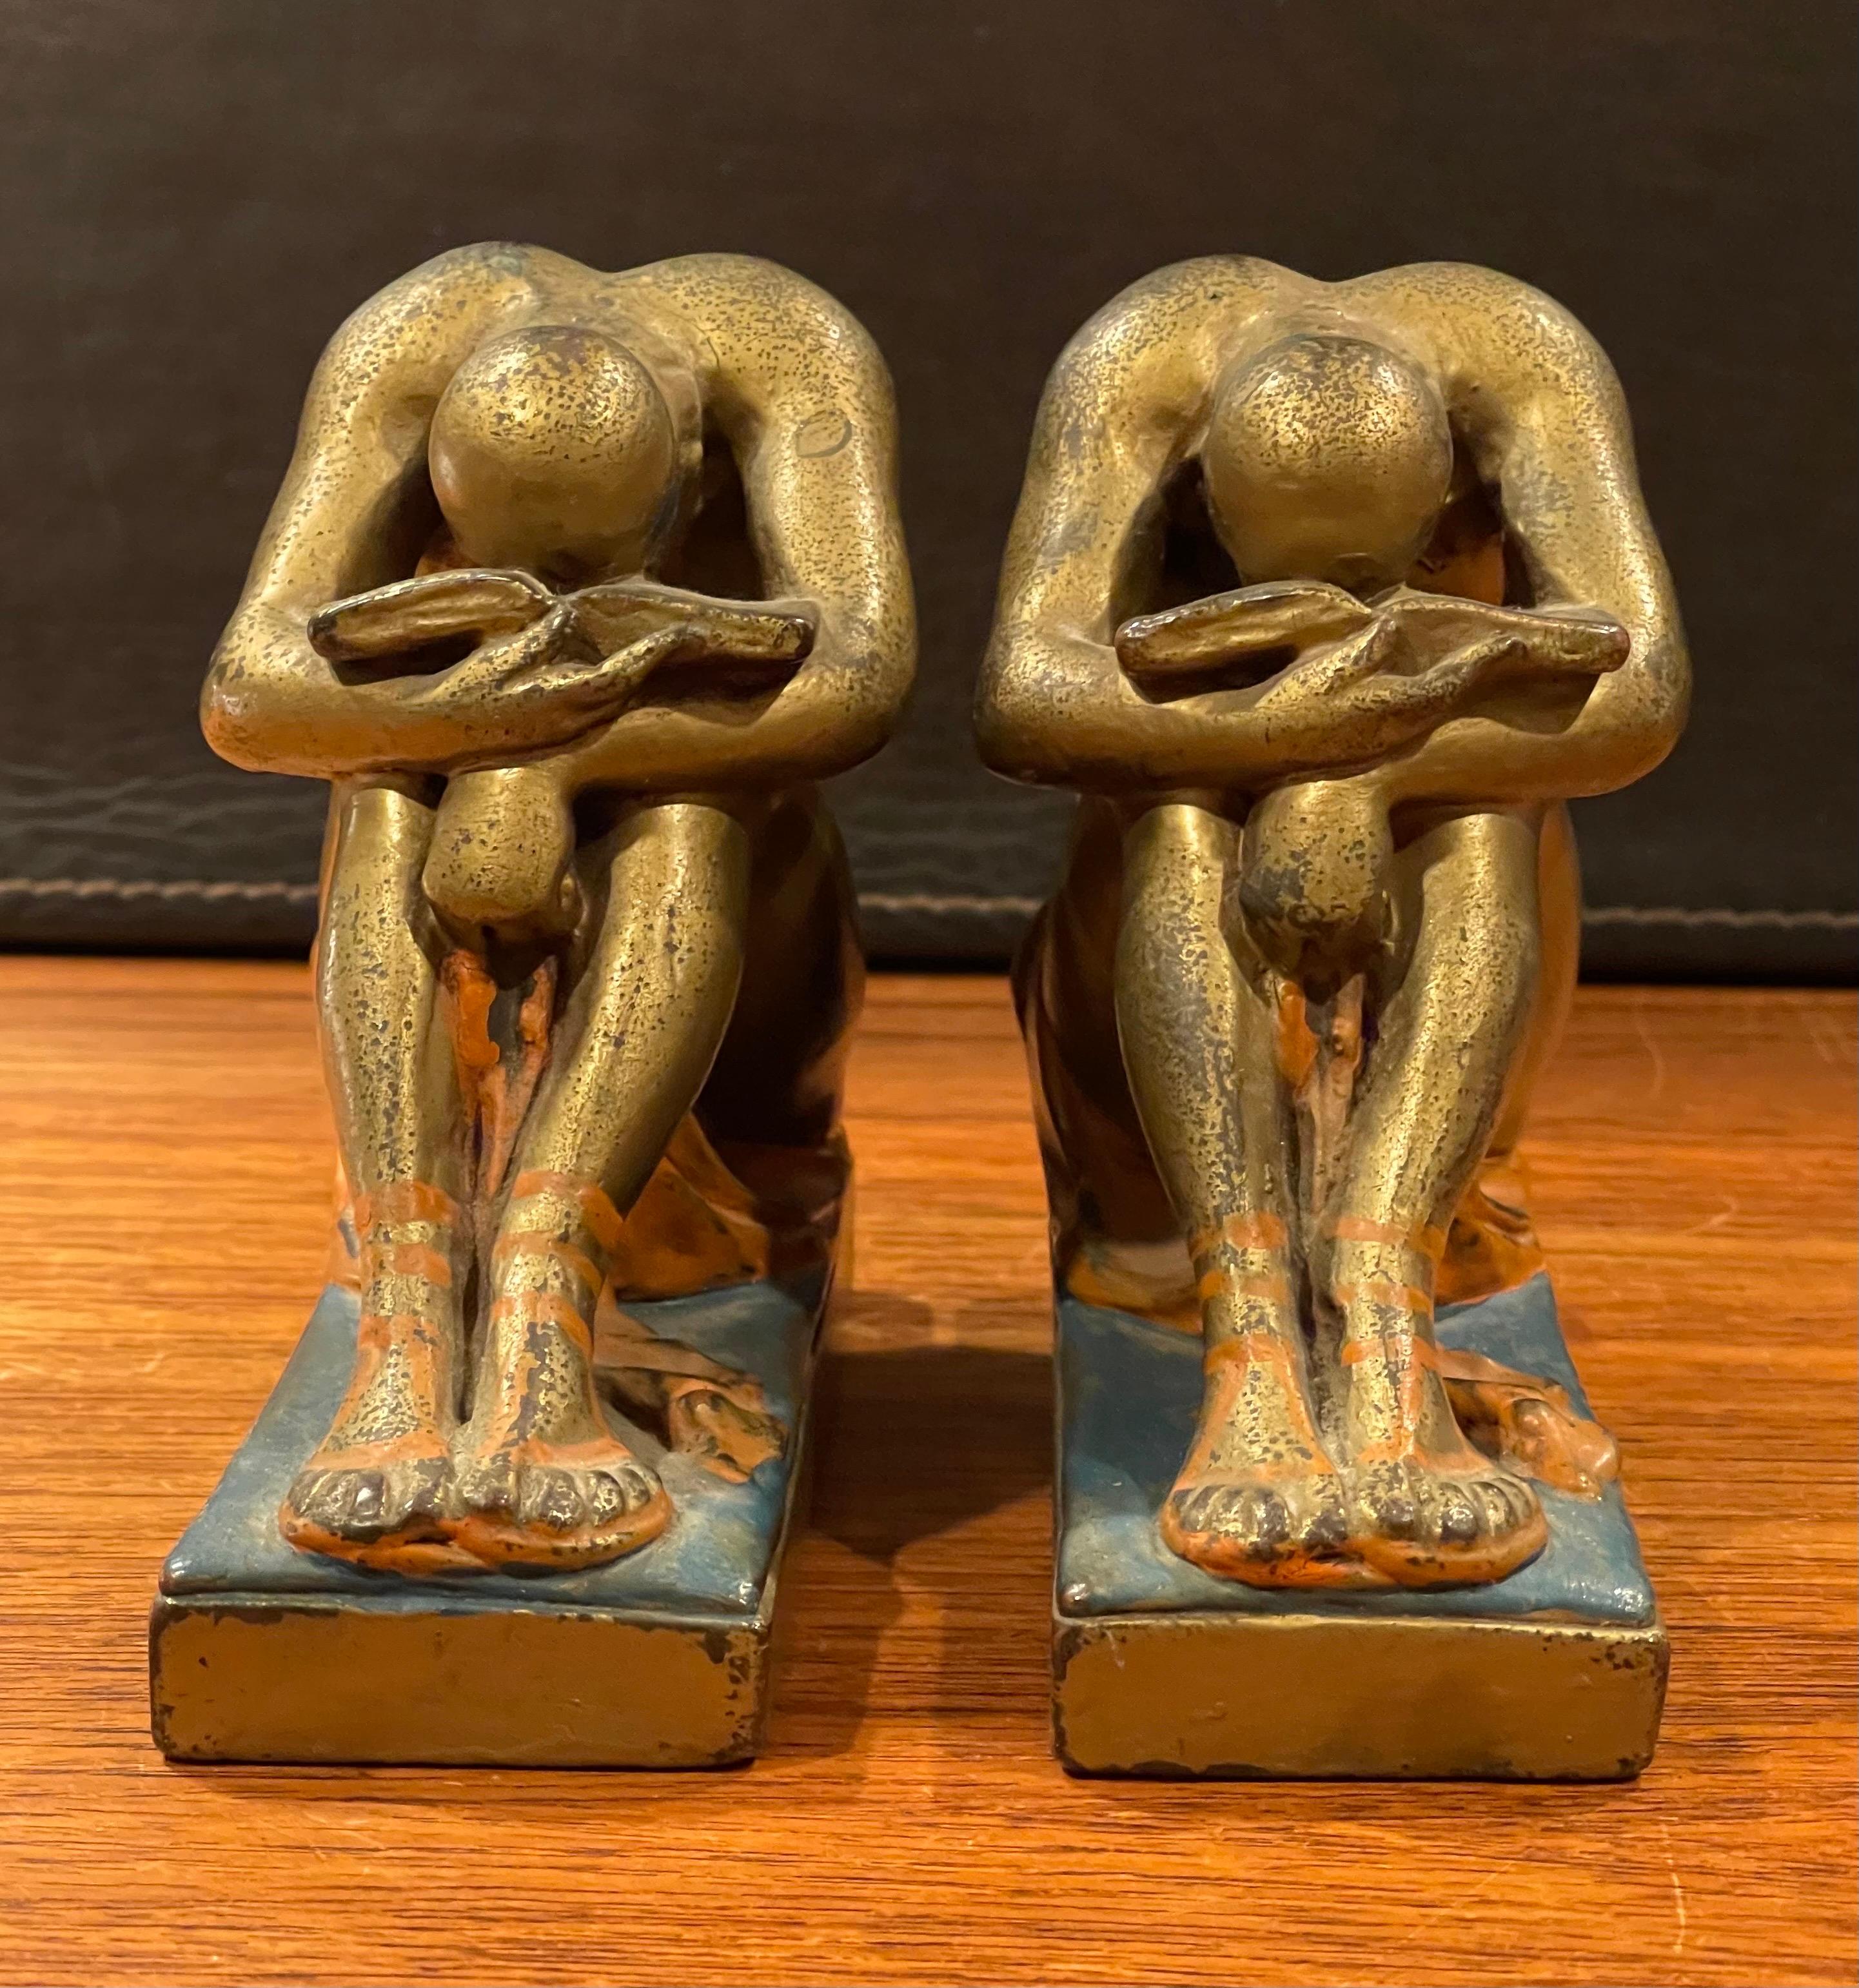 20th Century Antique Pair of Solitude / Scholar Bookends in Polychrome Bronze Finish For Sale